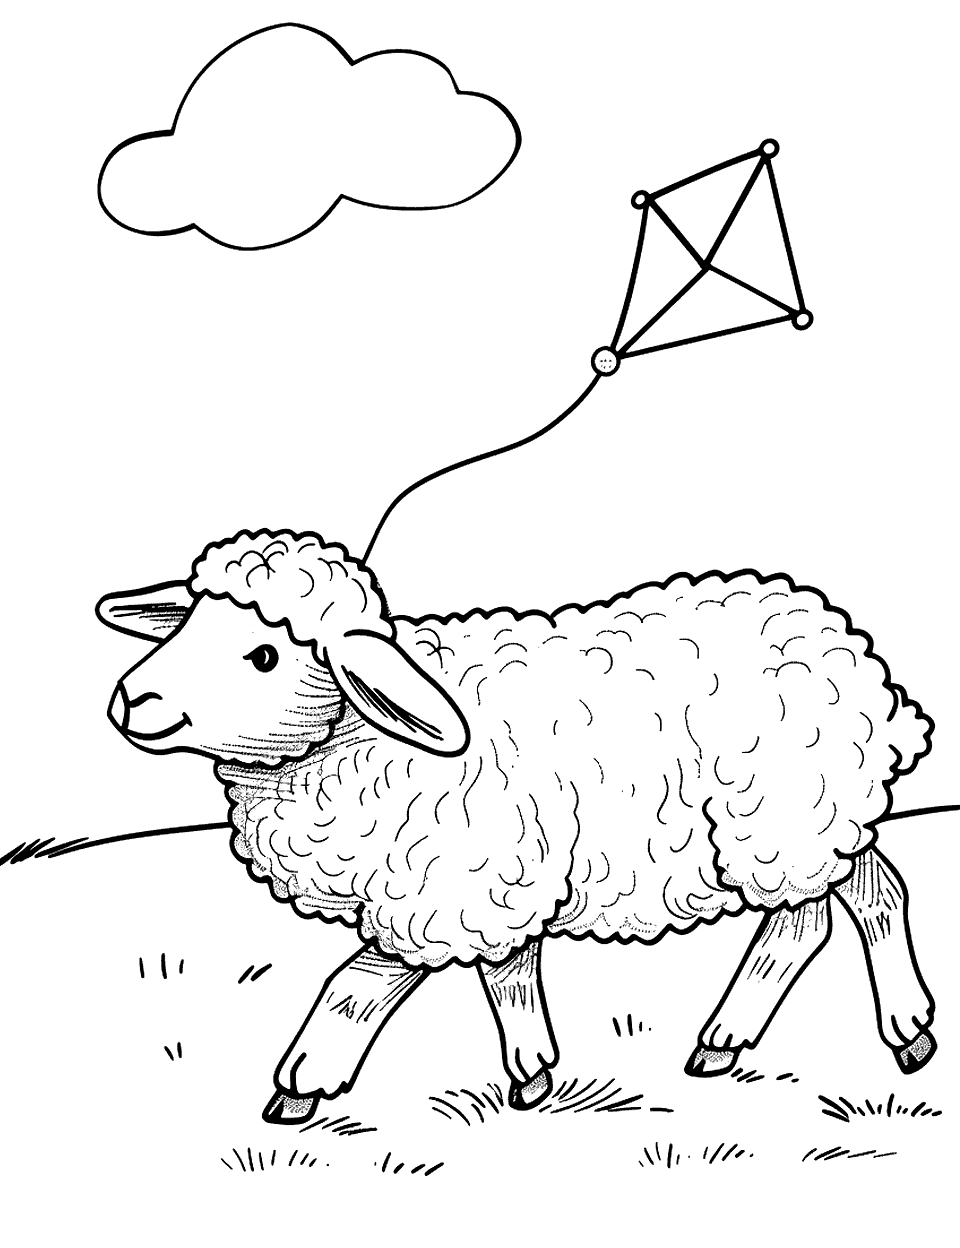 Sheep with a Kite Coloring Page - A sheep running across a field, flying a kite overhead.